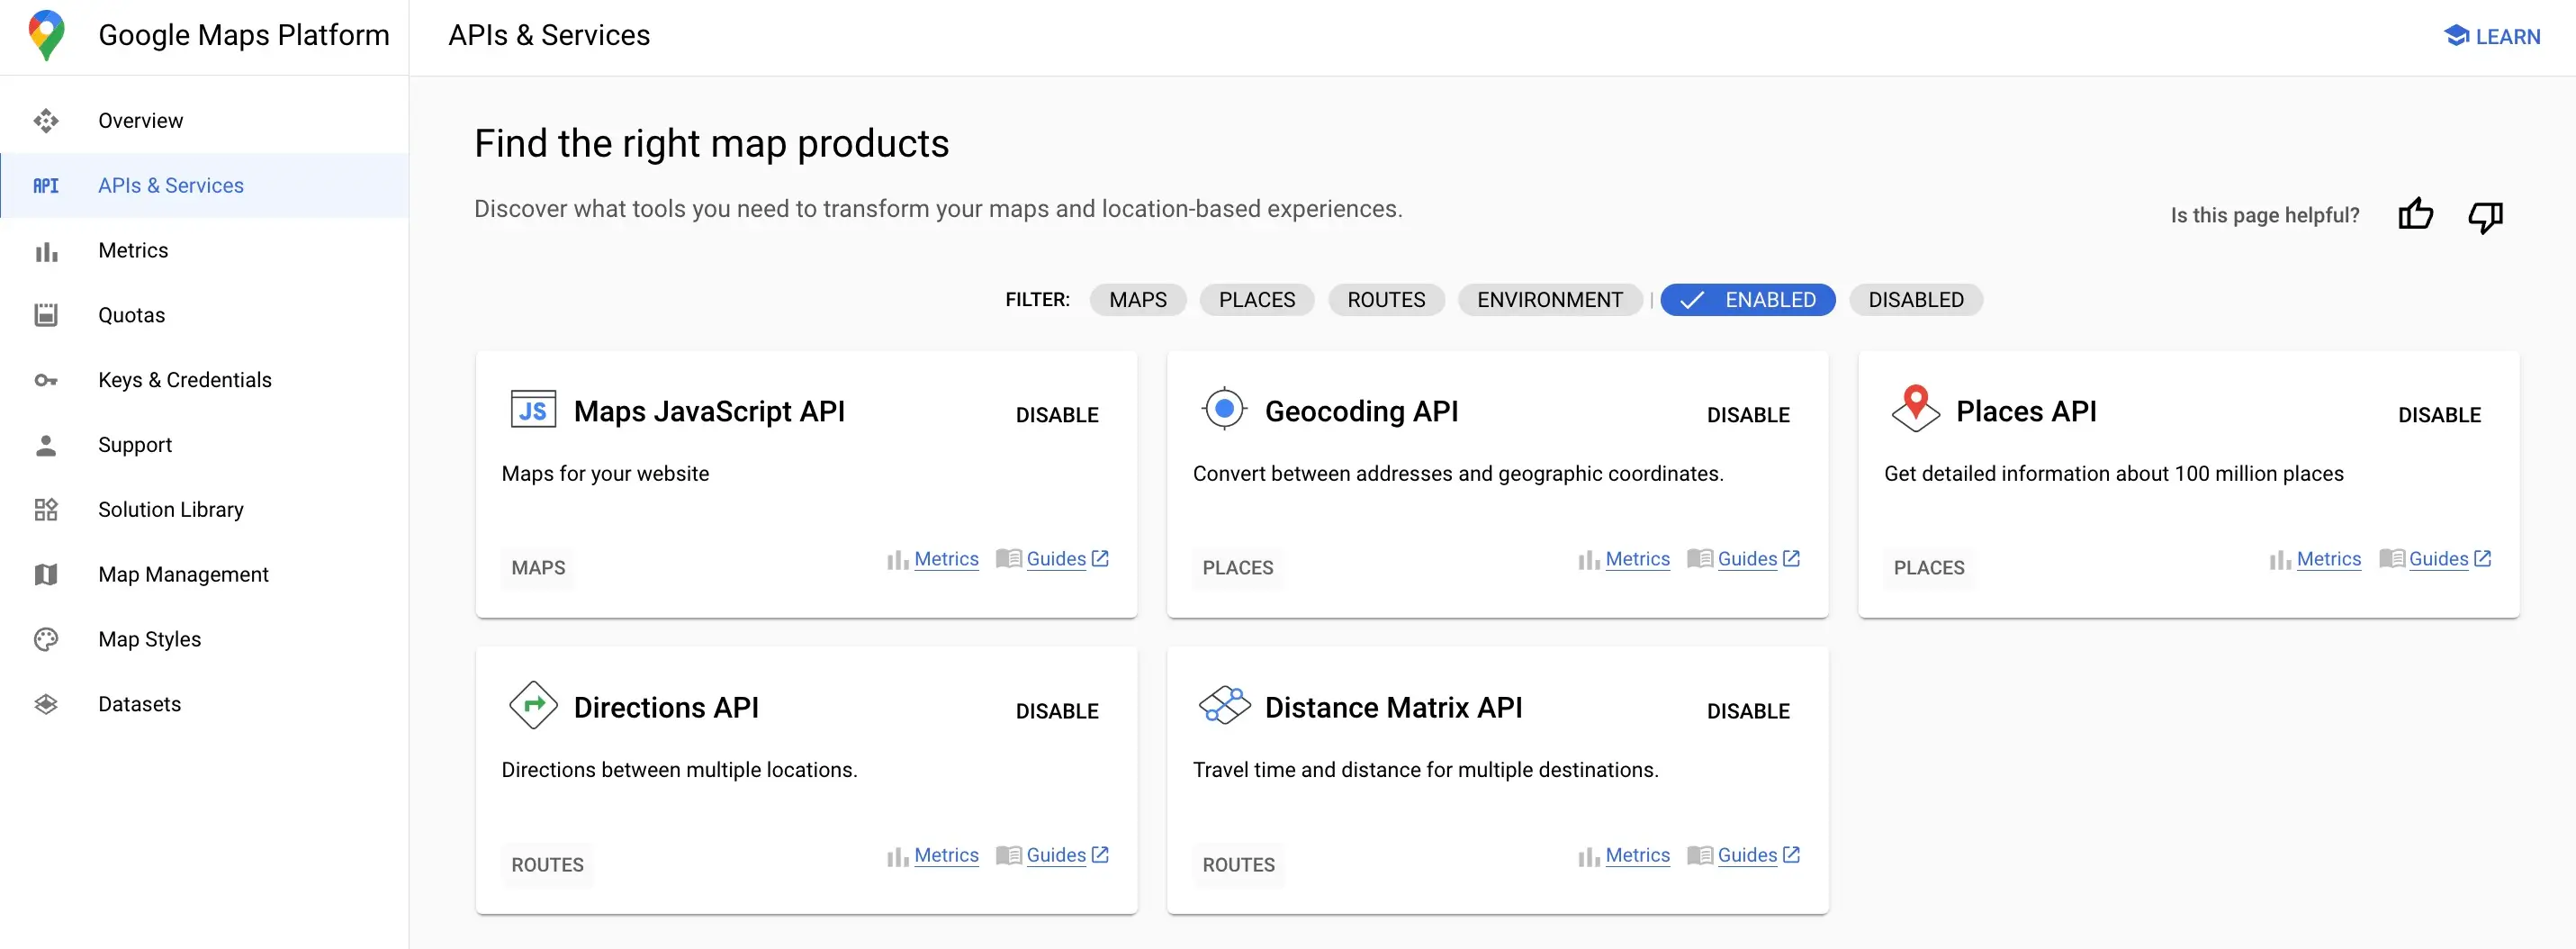 Enabled APIs for Map